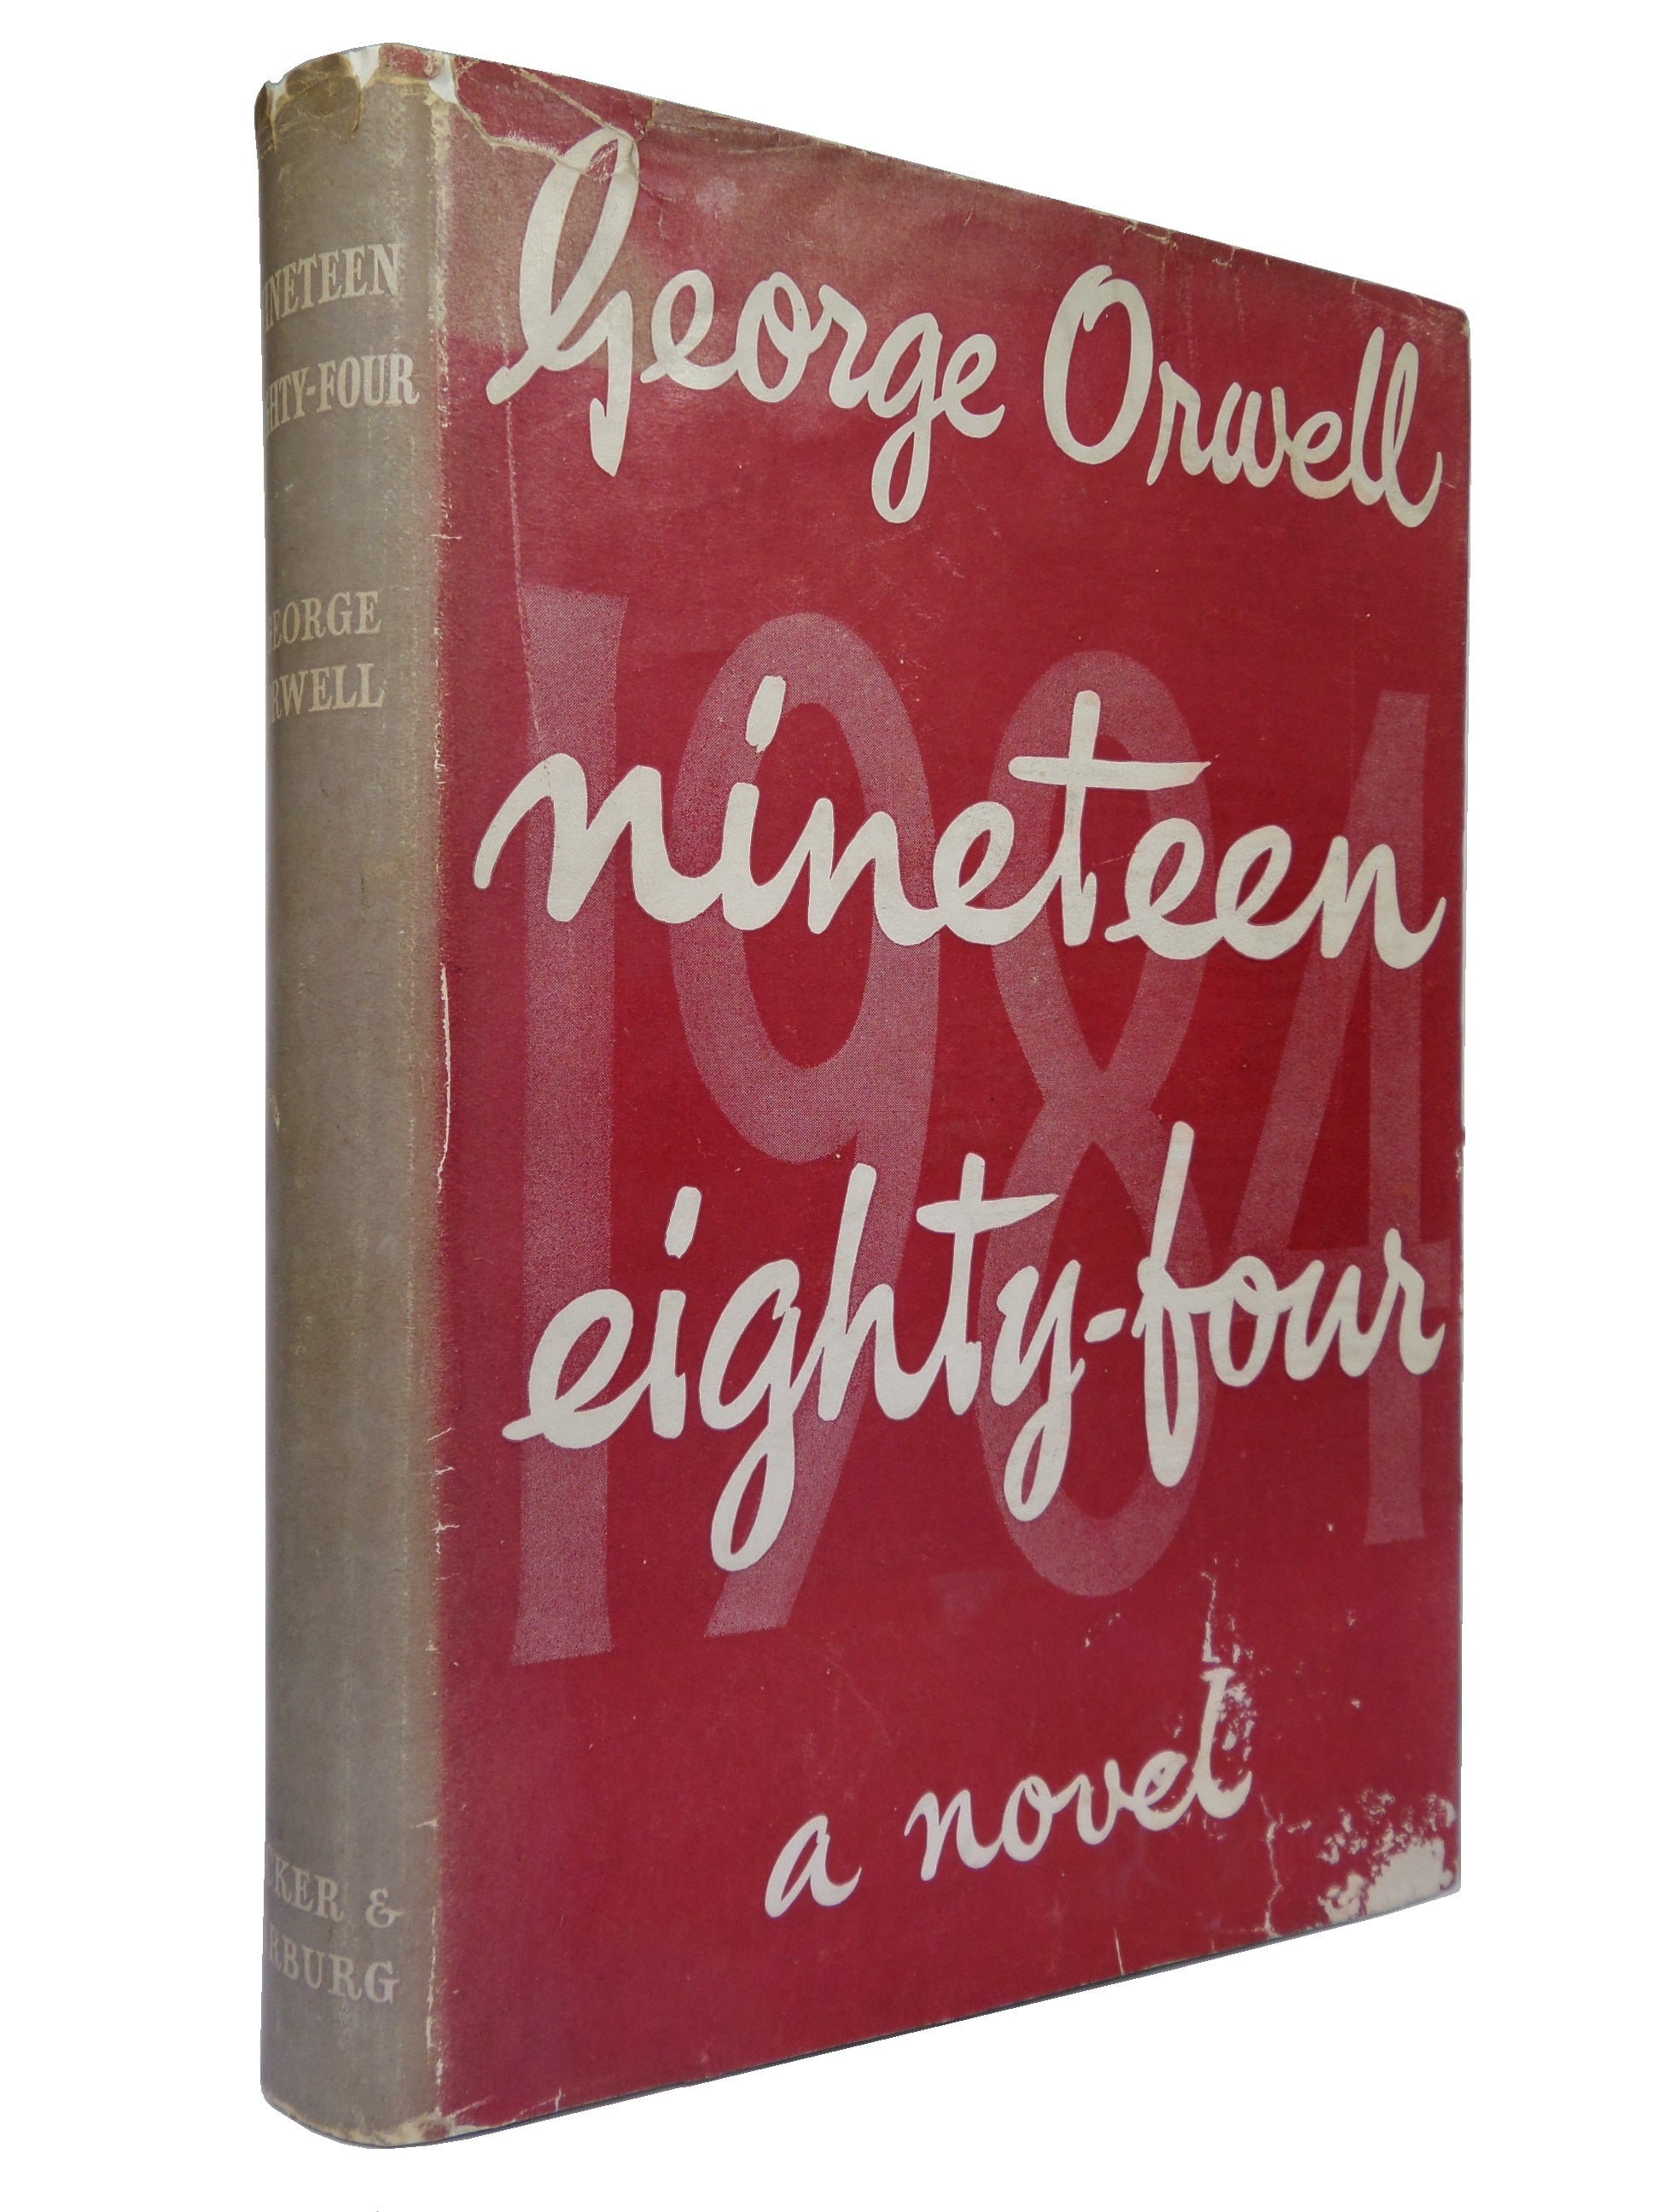 NINETEEN EIGHTY-FOUR BY GEORGE ORWELL 1949 FIRST EDITION, HARDBACK WITH DUST JACKET